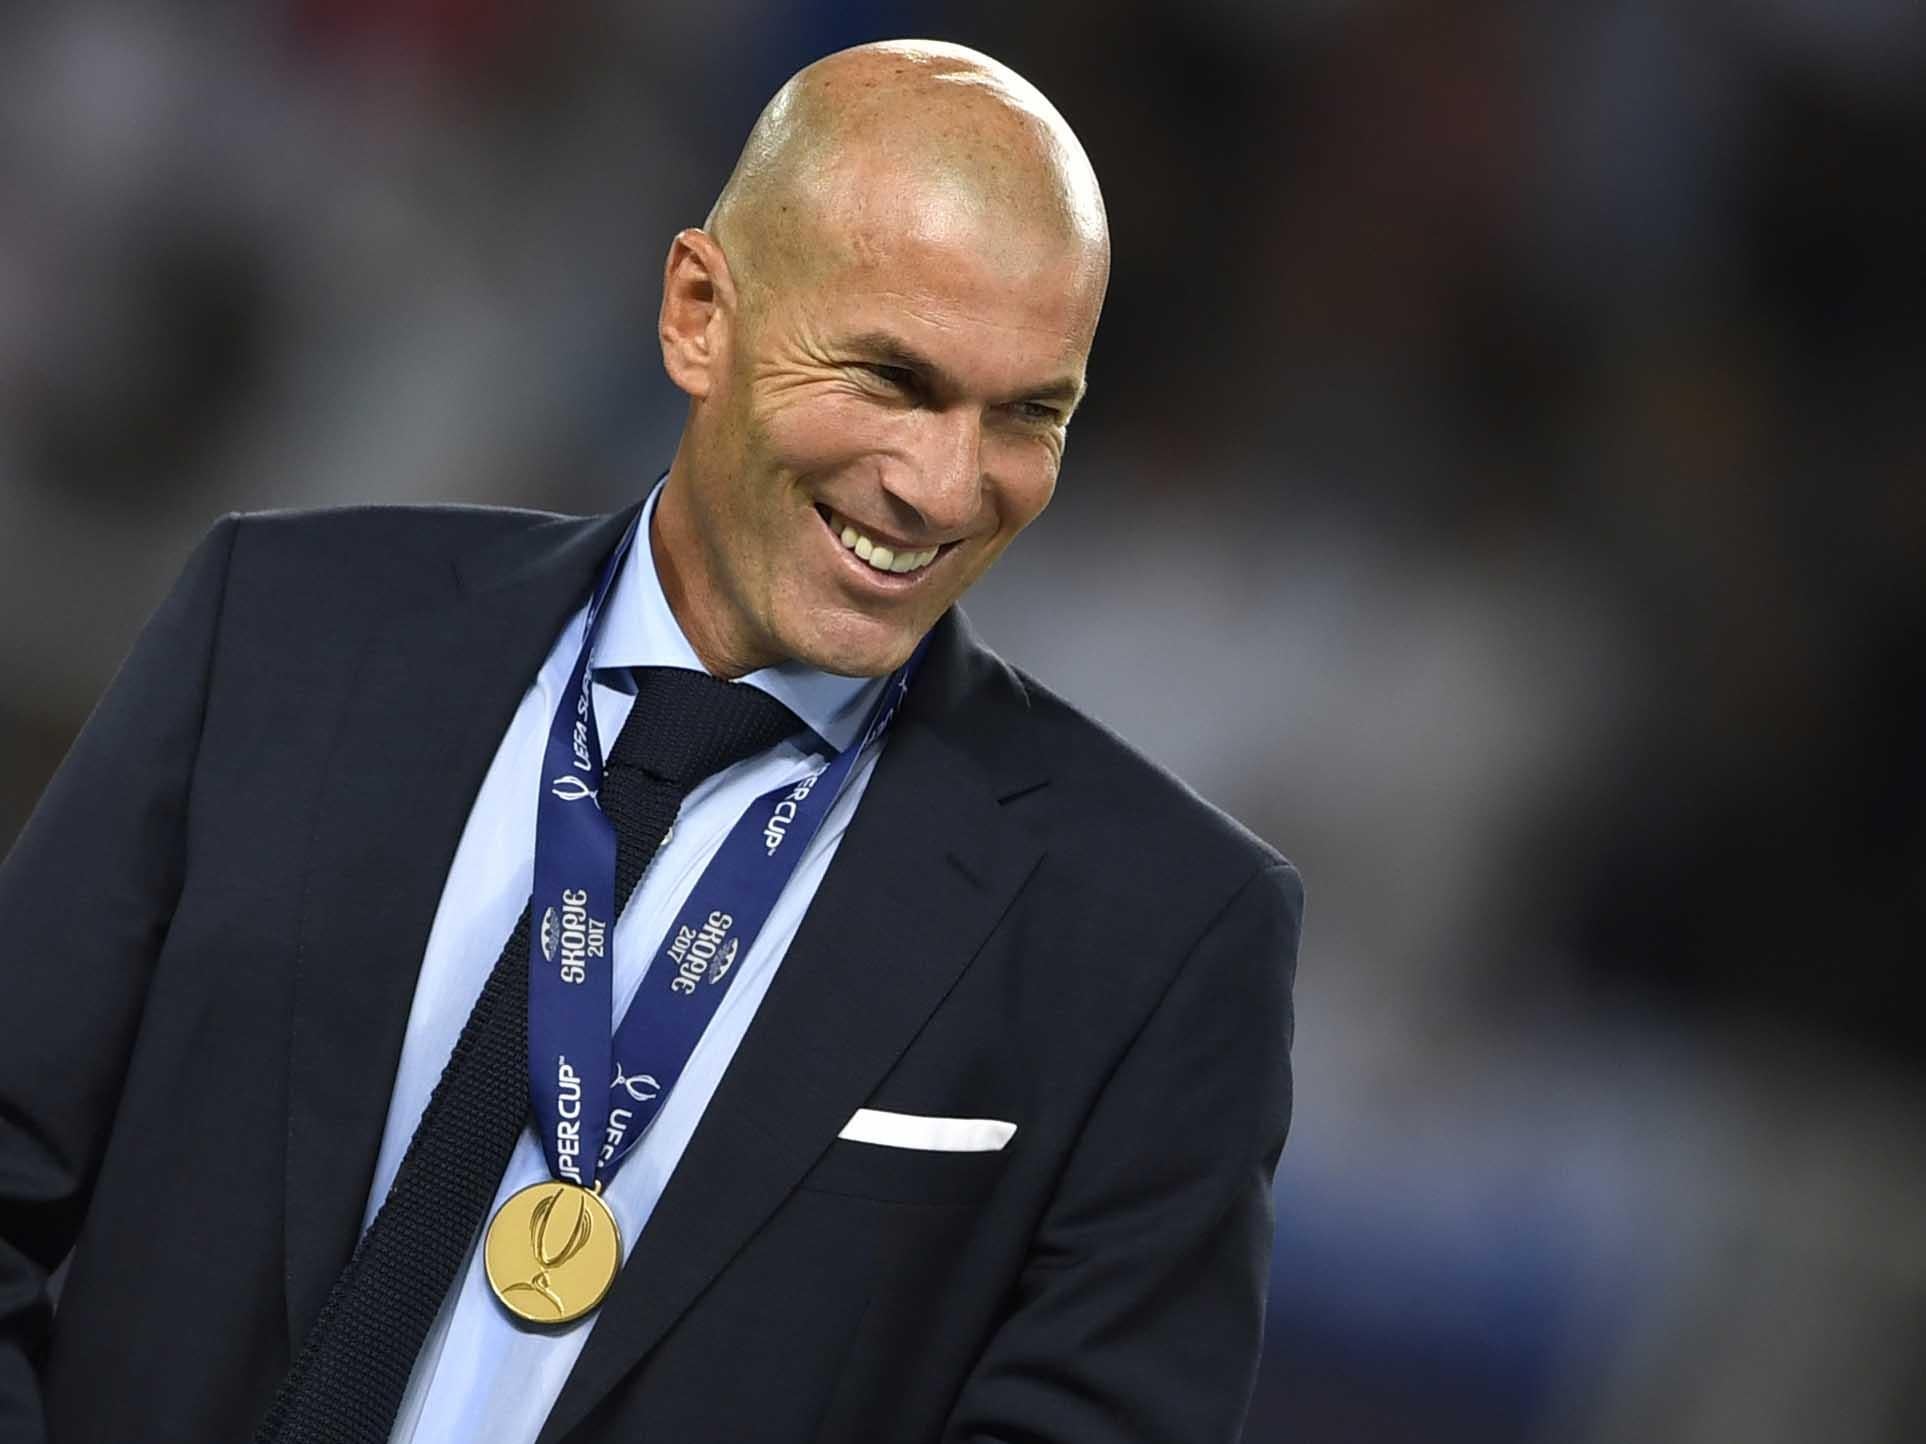 Zinedine Zidane drew level with Leo Beenhakker as Real Madrid's fourth most successful coach after victory in the European Super Cup